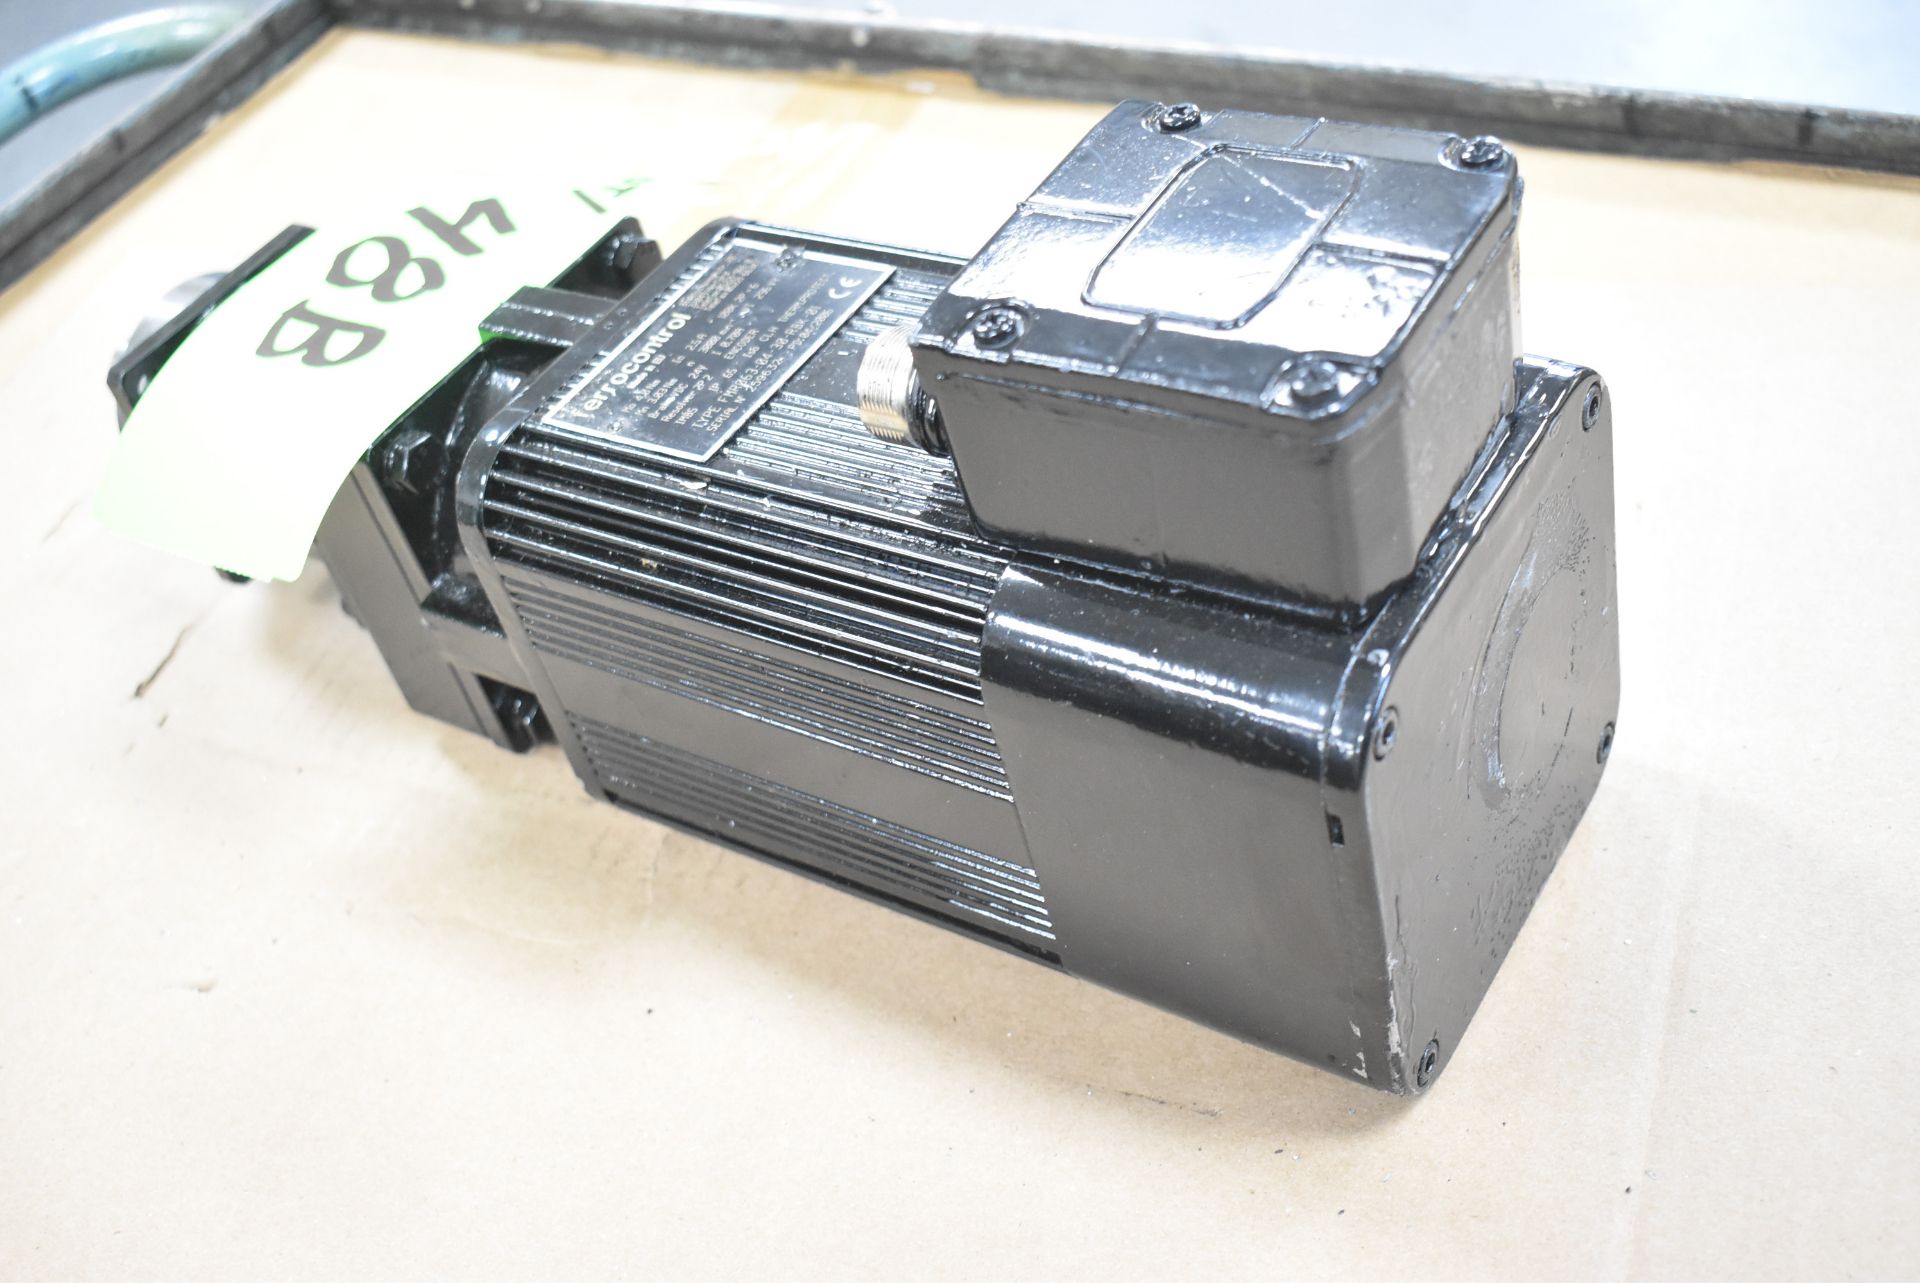 FERROCONTROL (2006) FMR063-04-30-RBK-01 X-AXIS SERVO MOTOR AND GEARBOX WITH 3000 RPM, S/N 259632 - Image 6 of 6